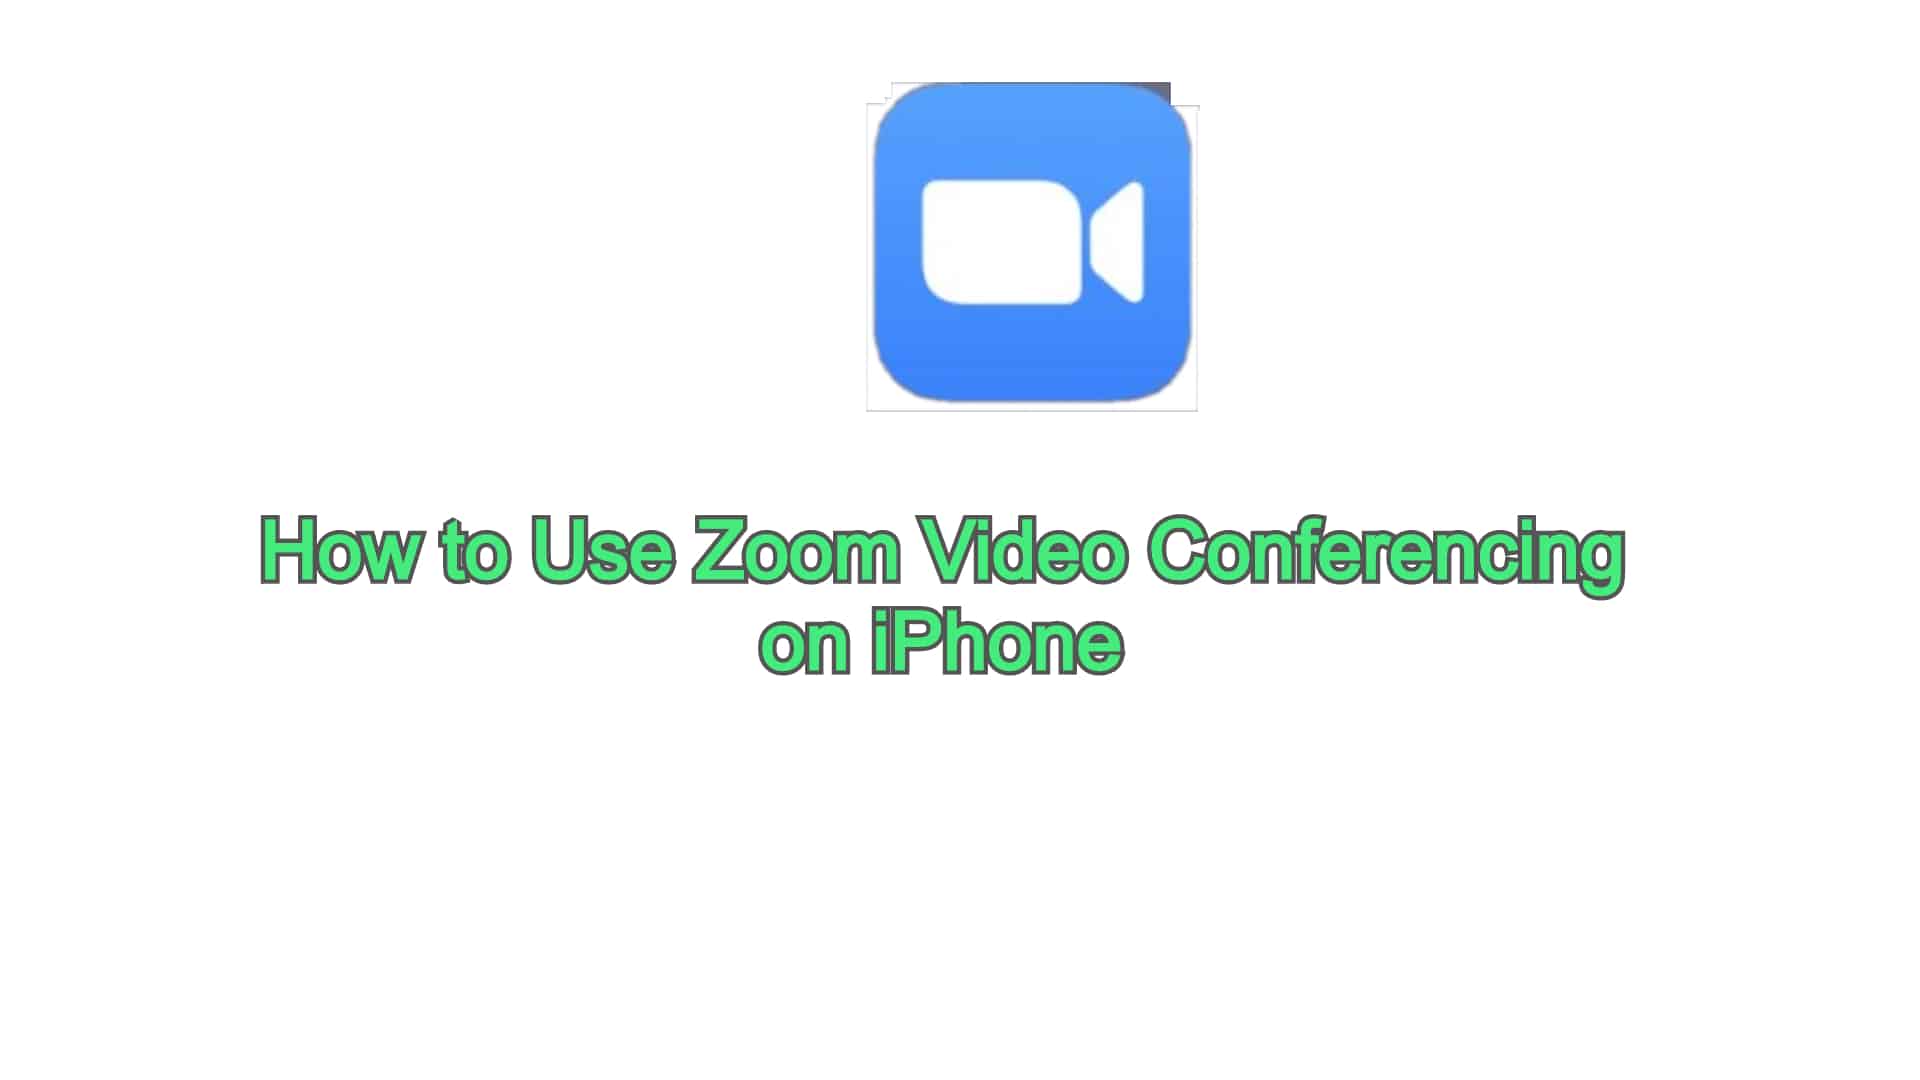 zoom video conference call translation